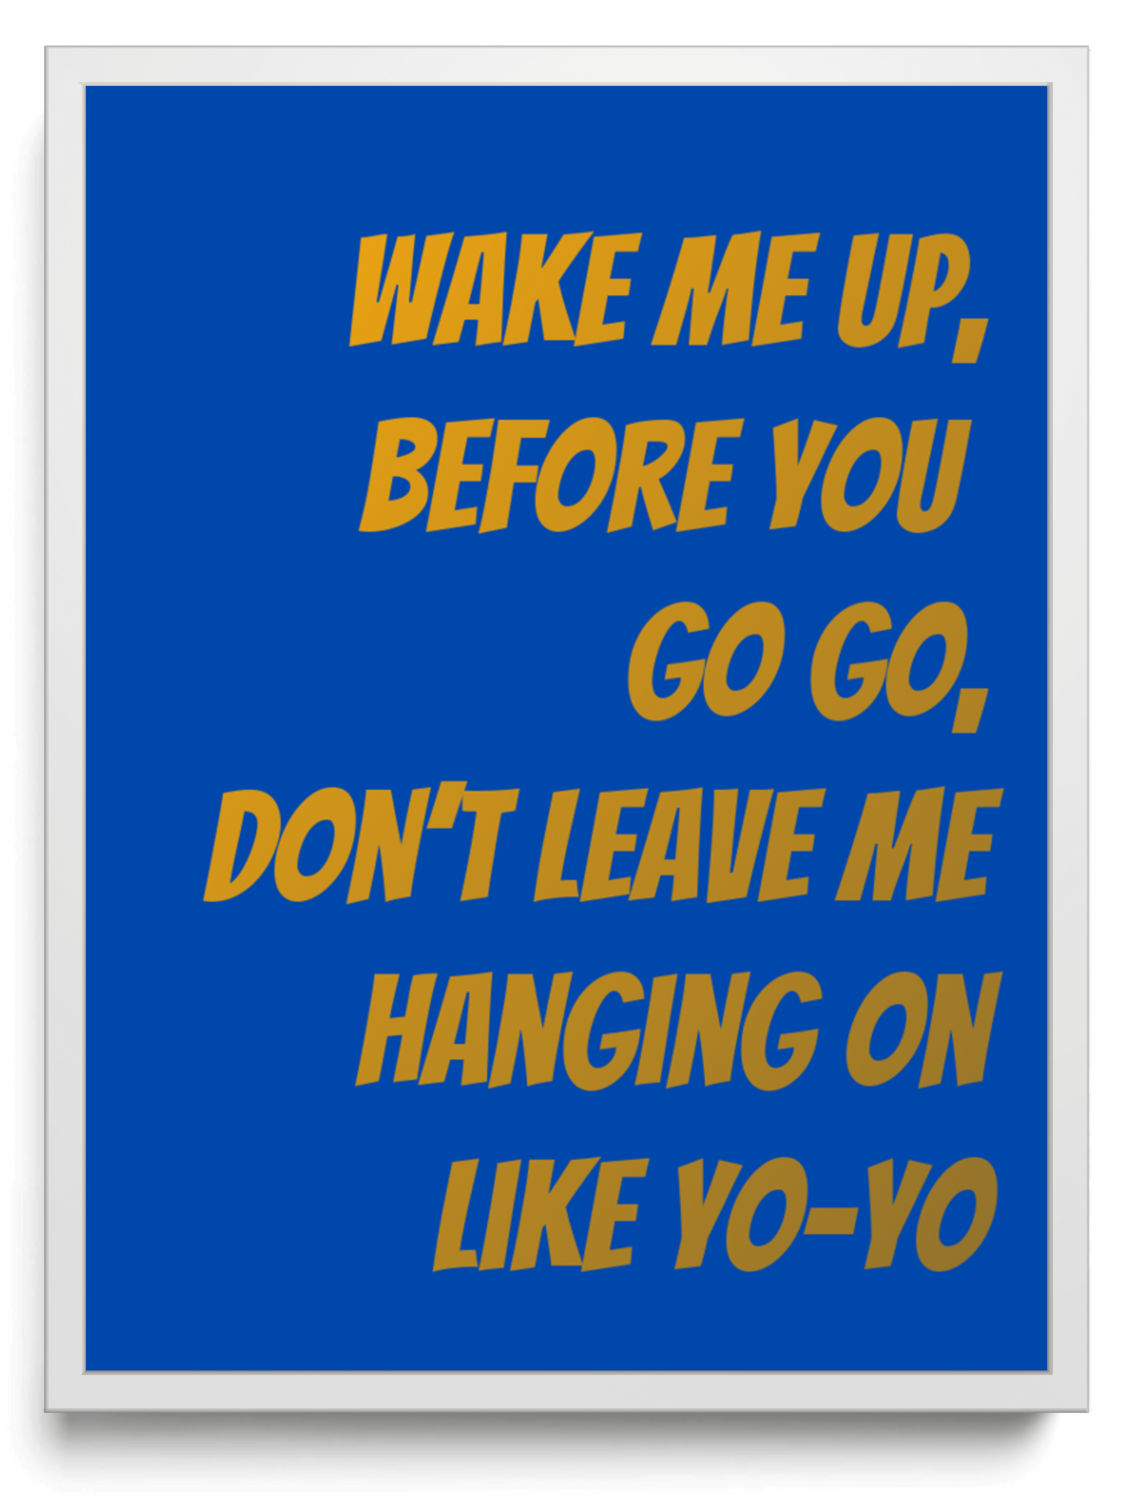 Wake me up before you go go Dont leave me hanging on like yo-yo framed typographic print